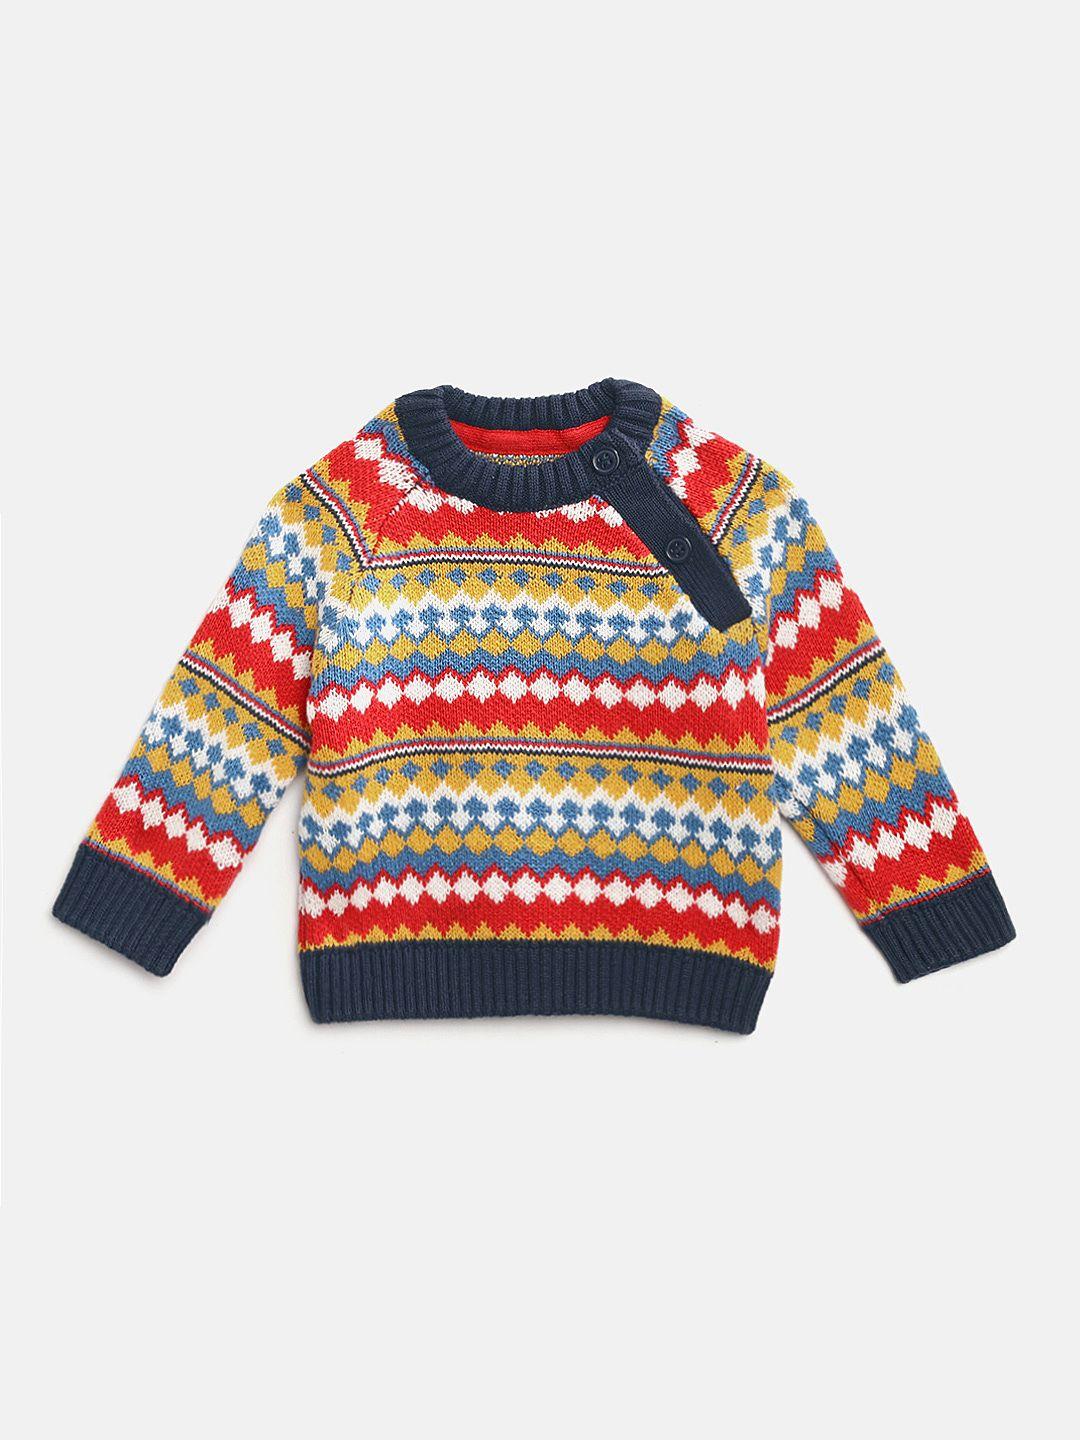 mothercare-infant-boys-red-&-mustard-yellow-fair-isle-patterned-cotton-pullover